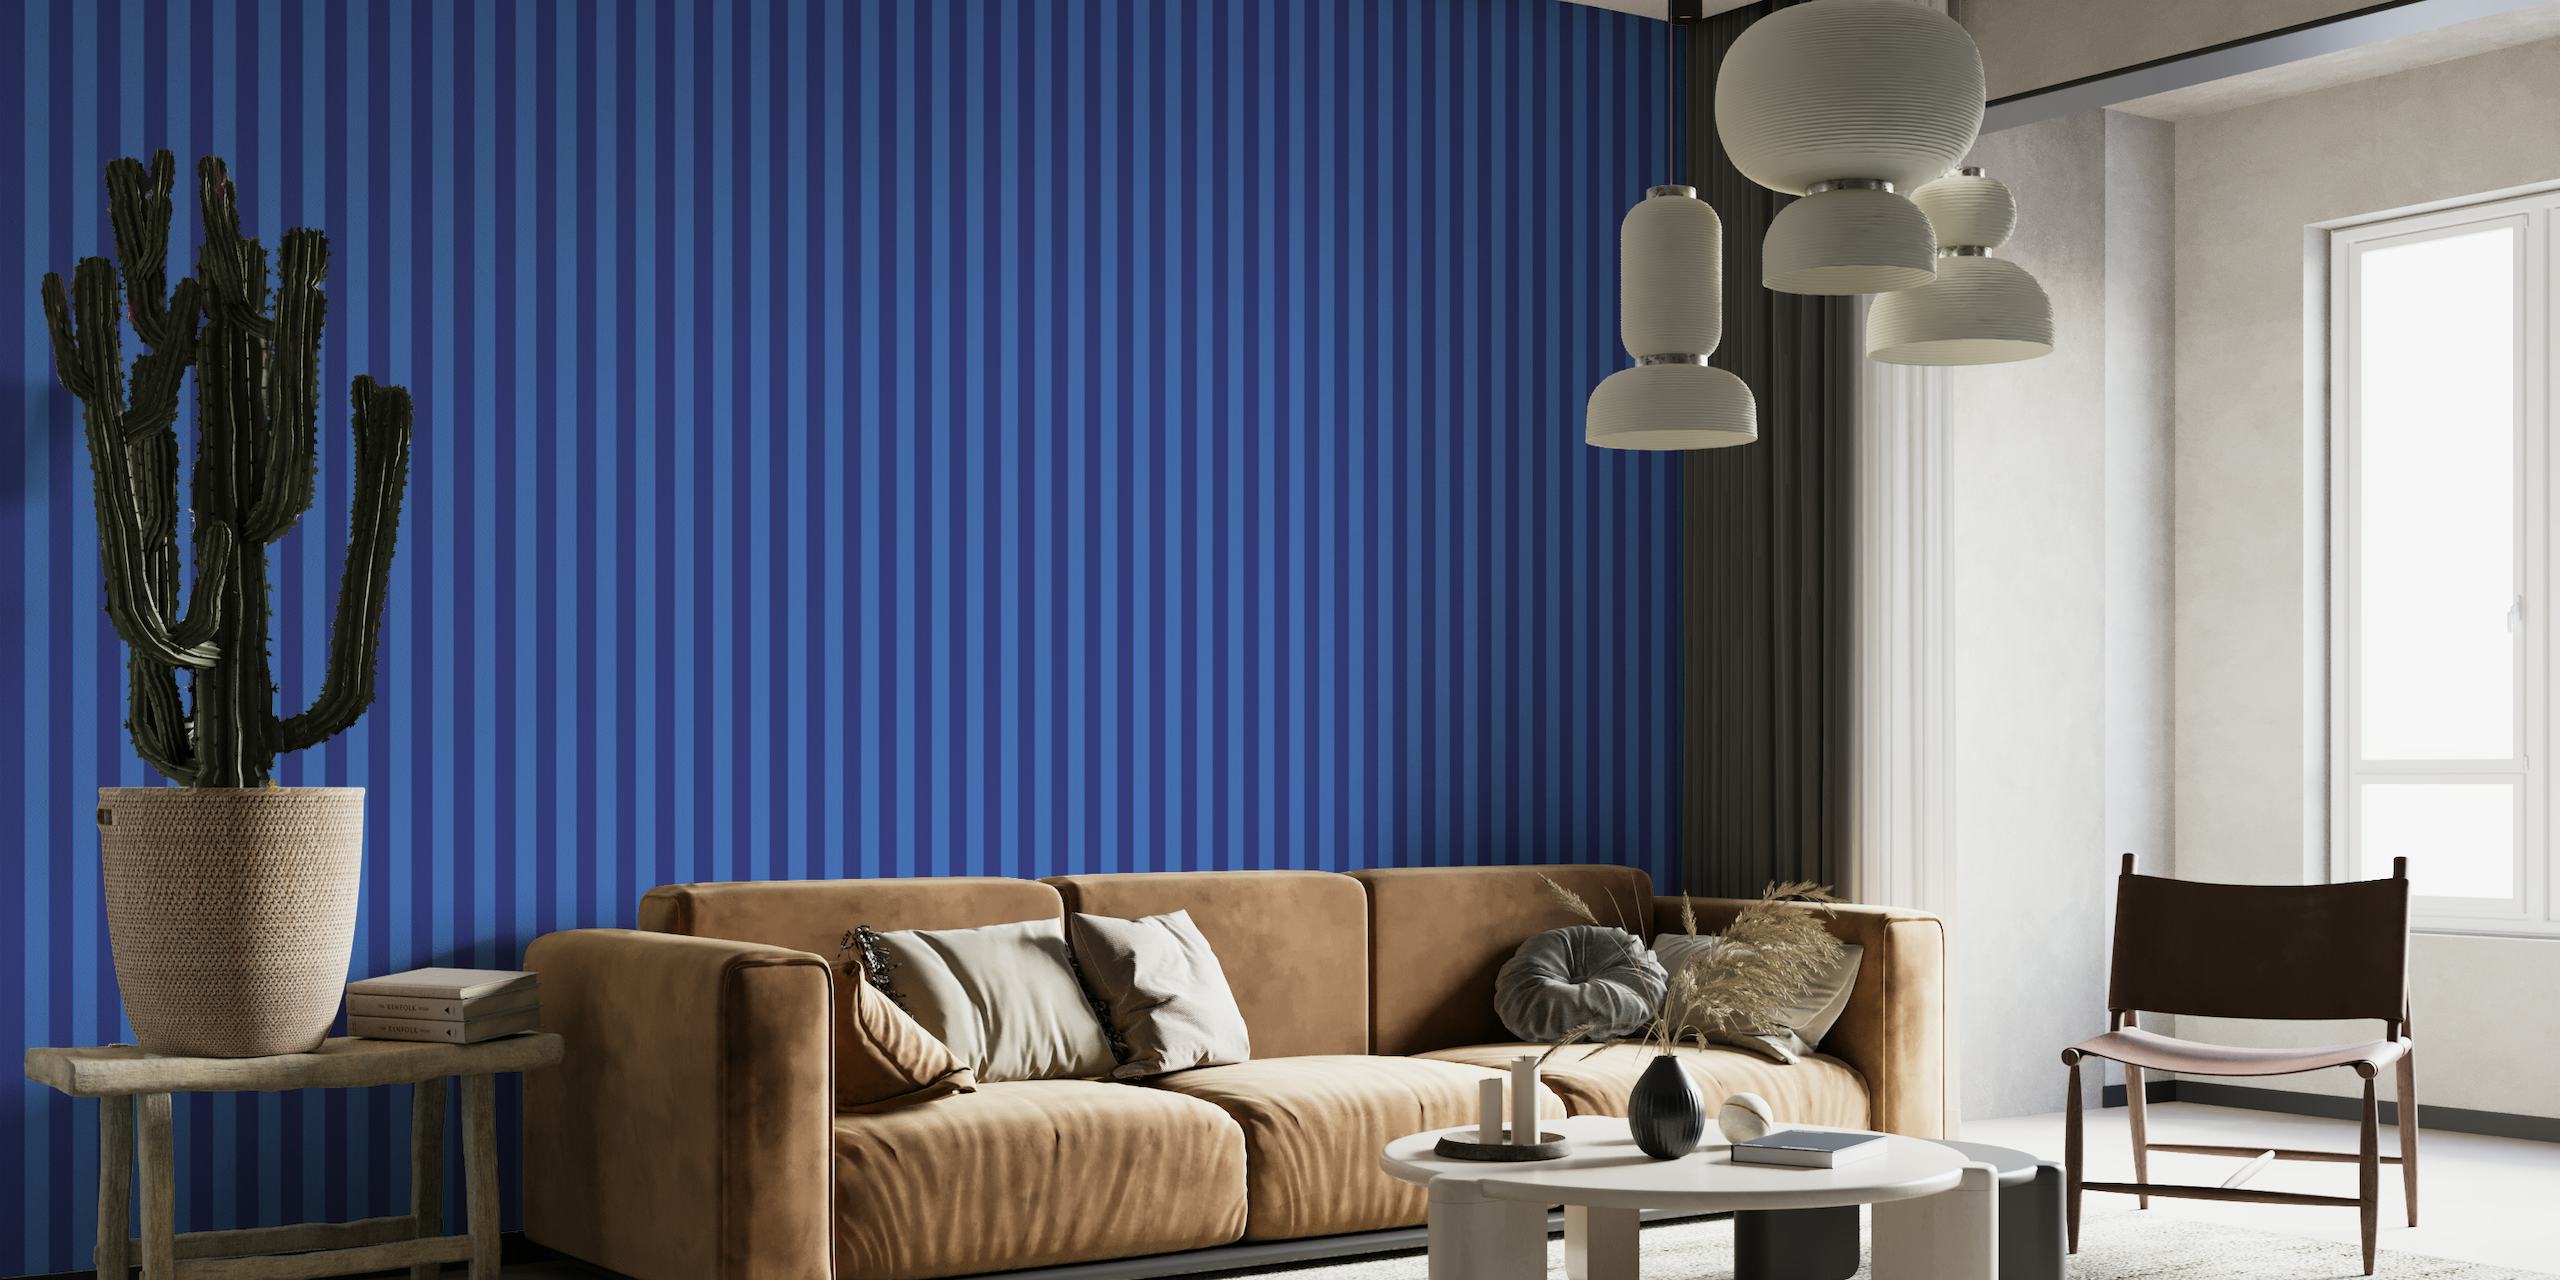 Cobalt and Navy blue stripes ταπετσαρία